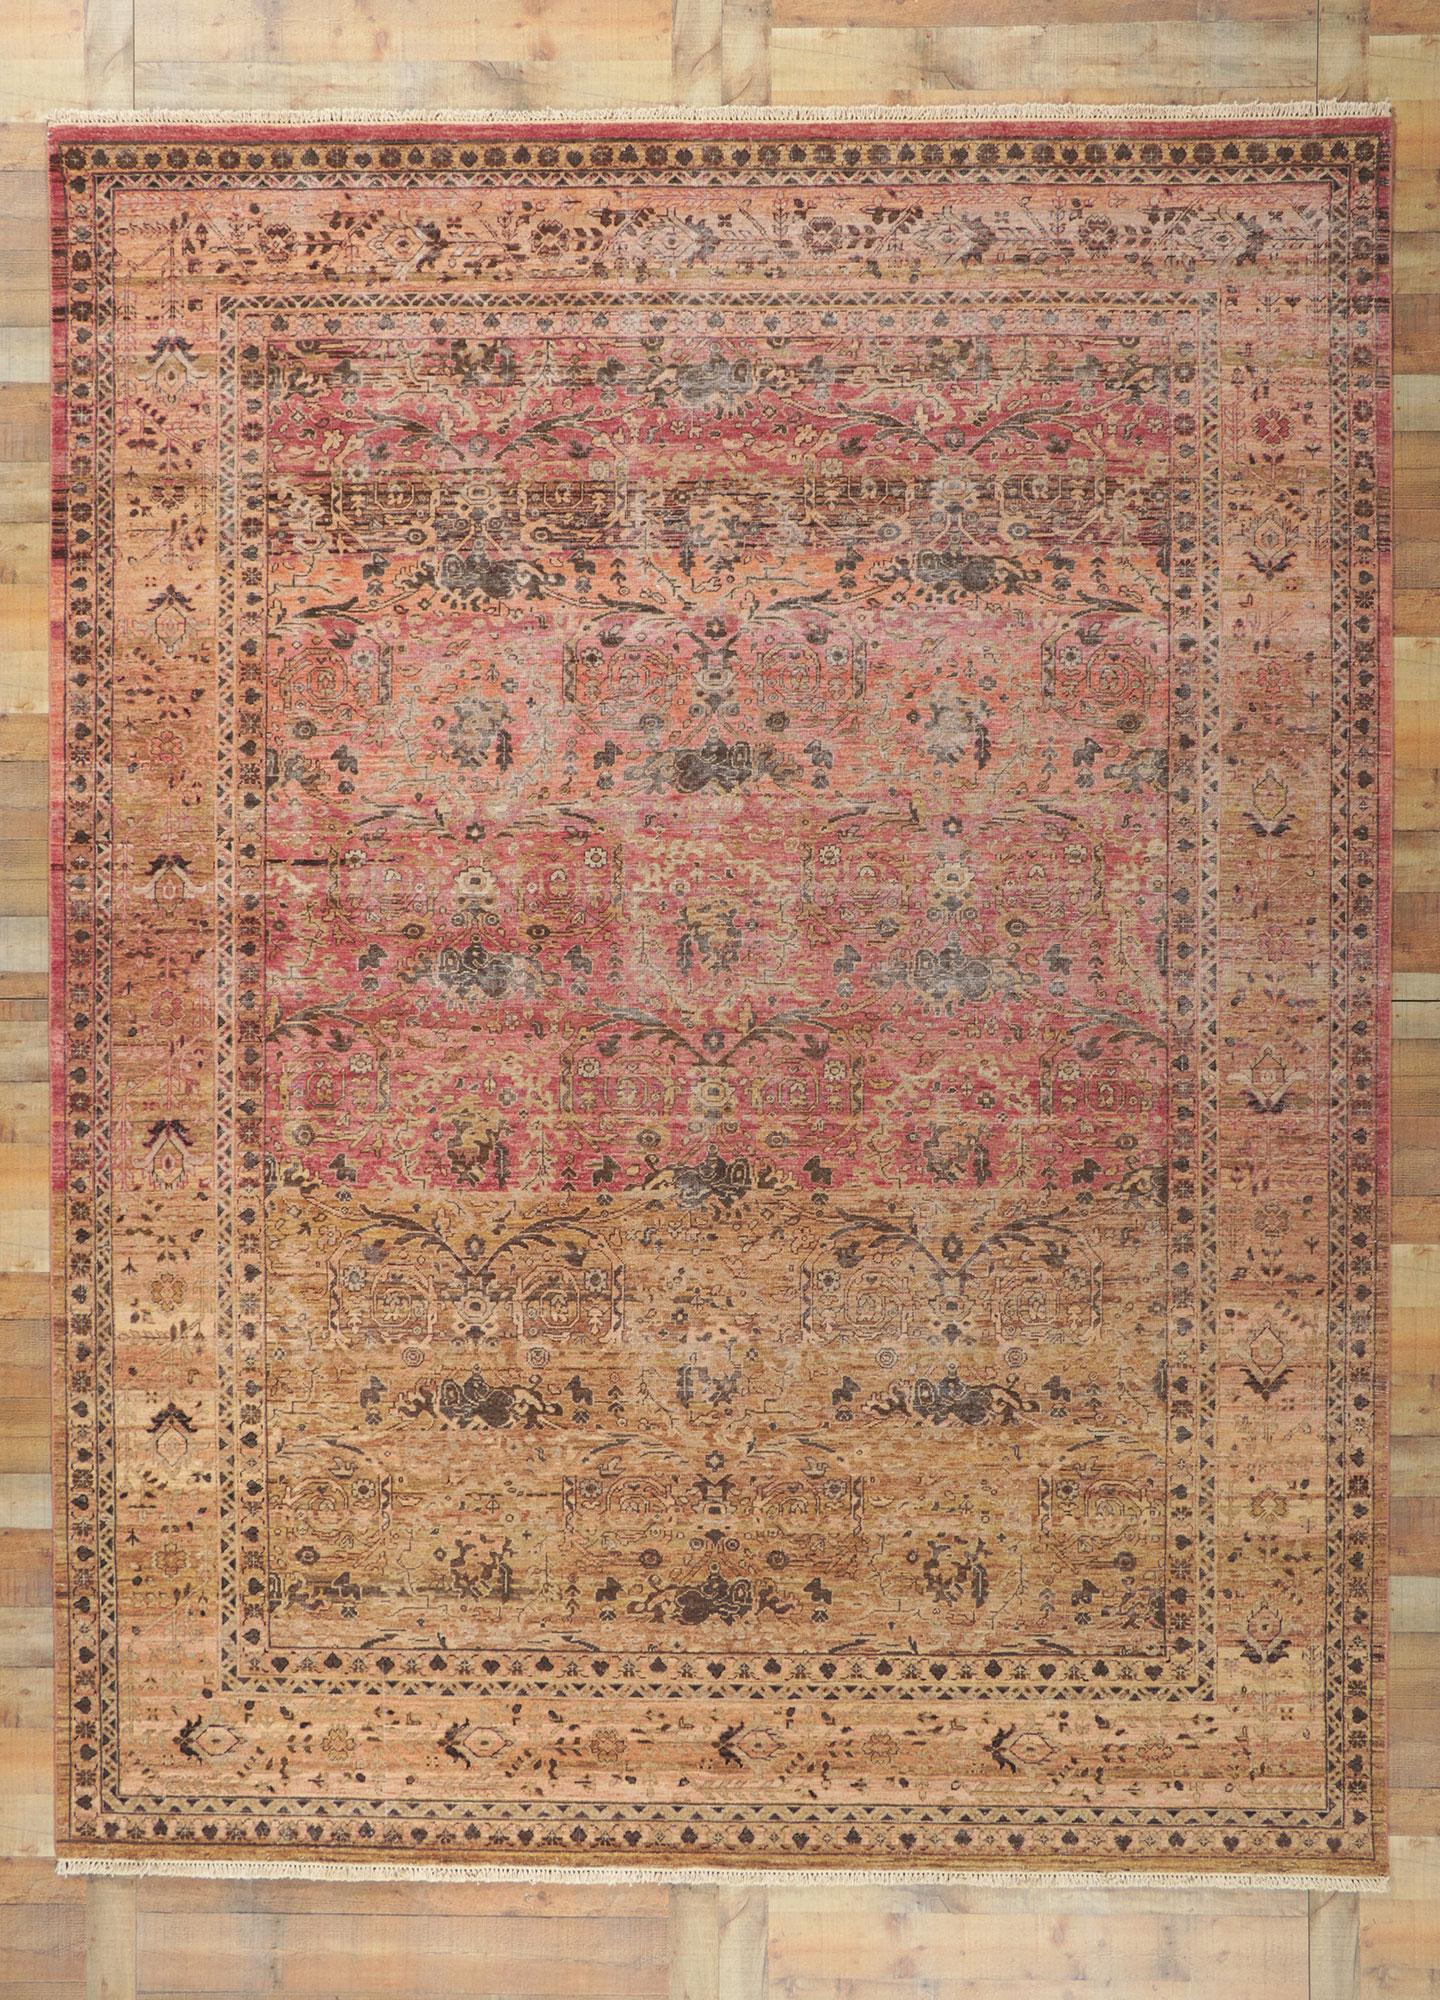 New Vintage-Style Distressed Rug with Rustic Earth-Tone Colors For Sale 1